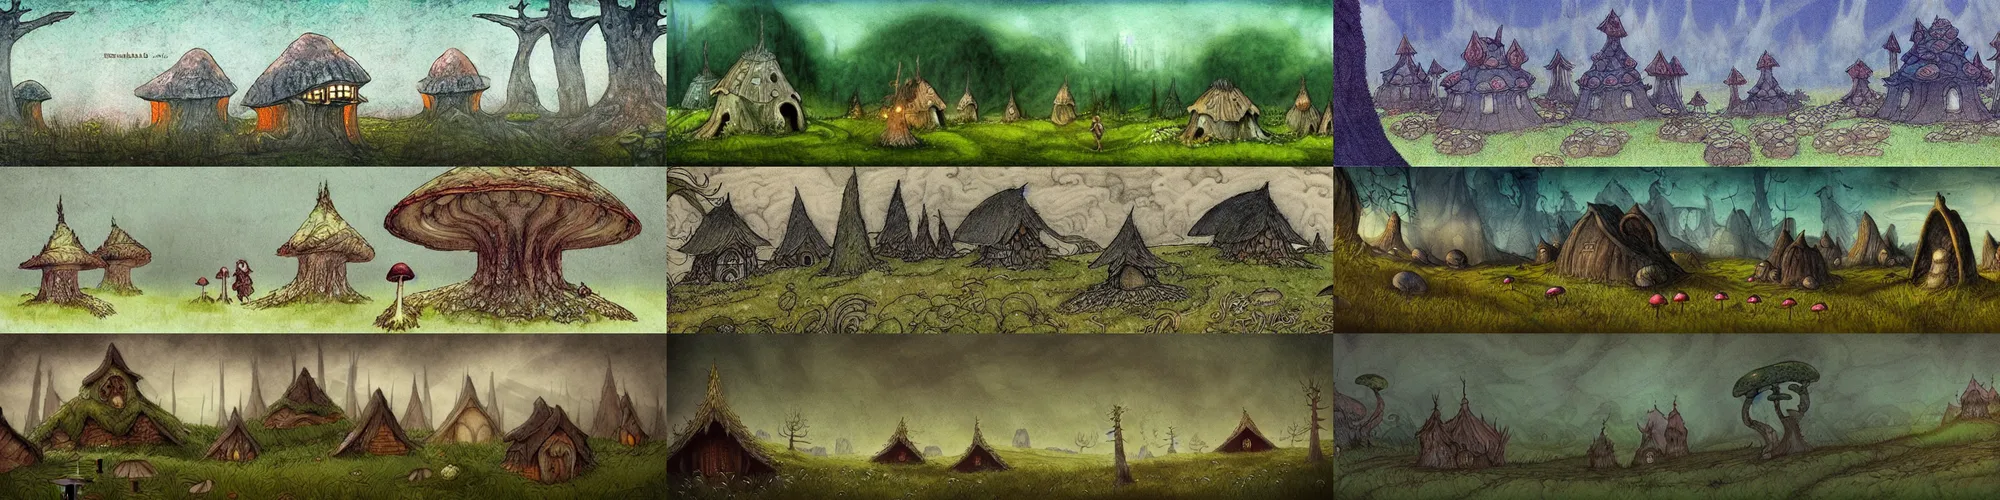 Prompt: “wide shot, concept art, a fairytale landscape, mushroom houses, grendel from beowulf, in the style of John Bauer and wimmelbilder”